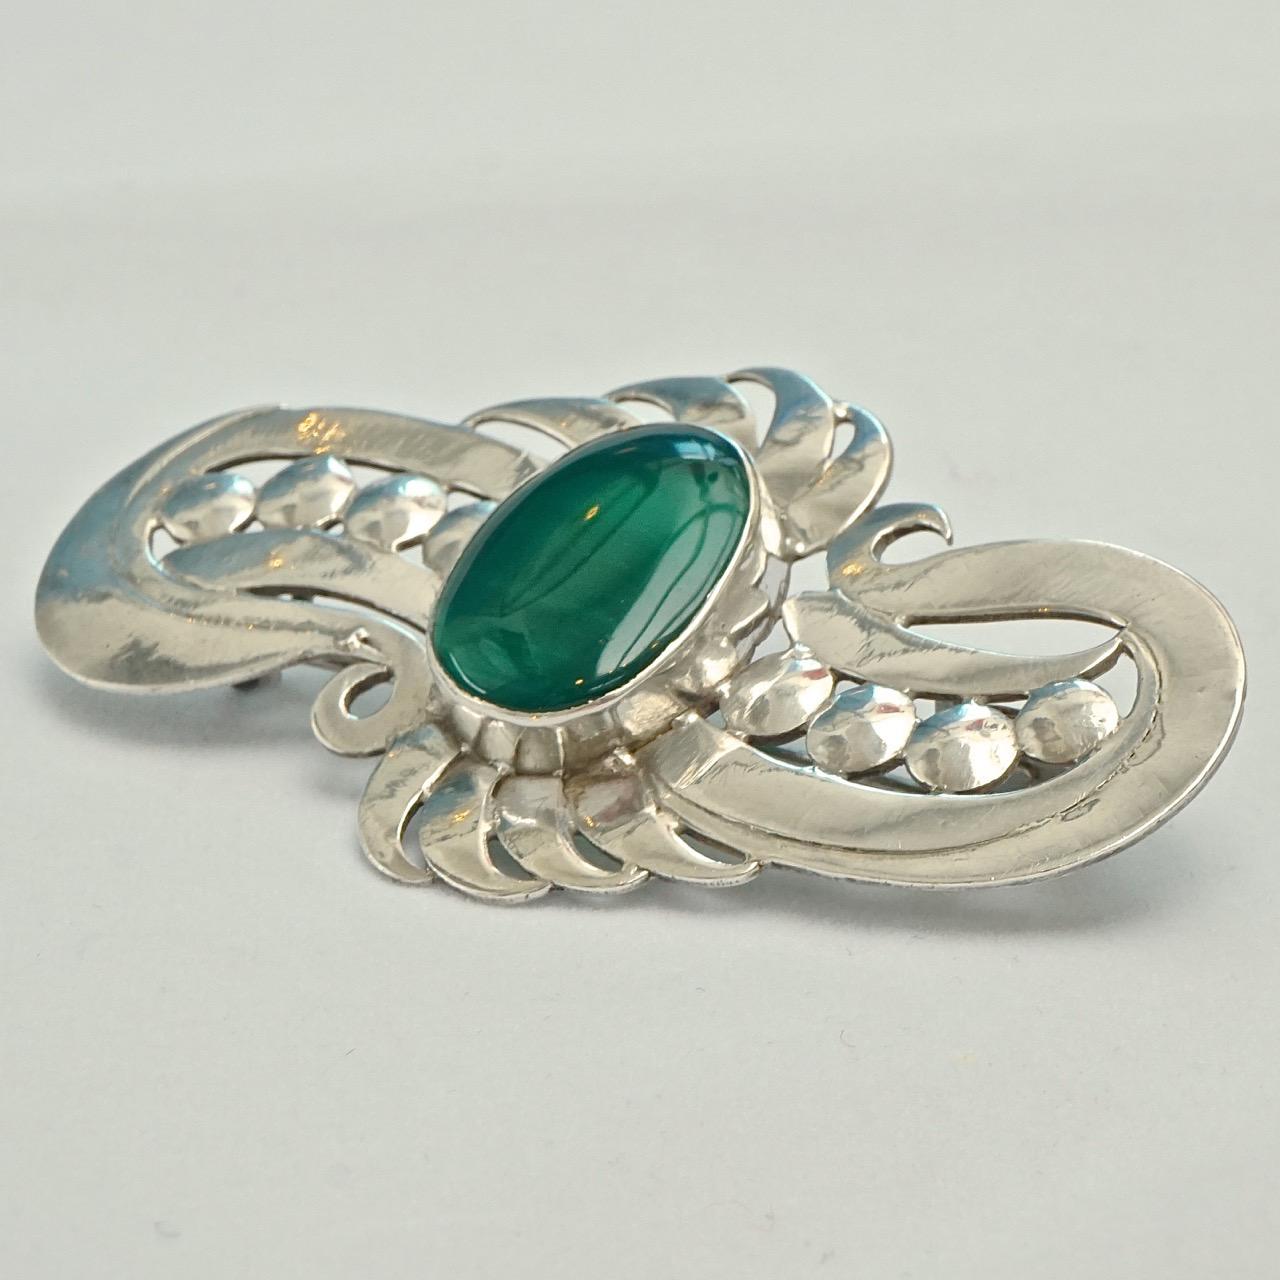 
Wonderful sterling silver hand crafted brooch, featuring an oval chrysoprase. This lovely brooch tests for silver and is stamped 925. Measuring length 7.2cm / 2.8 inches by width 4cm / 1.5 inches. The brooch is in very good condition.

This is a